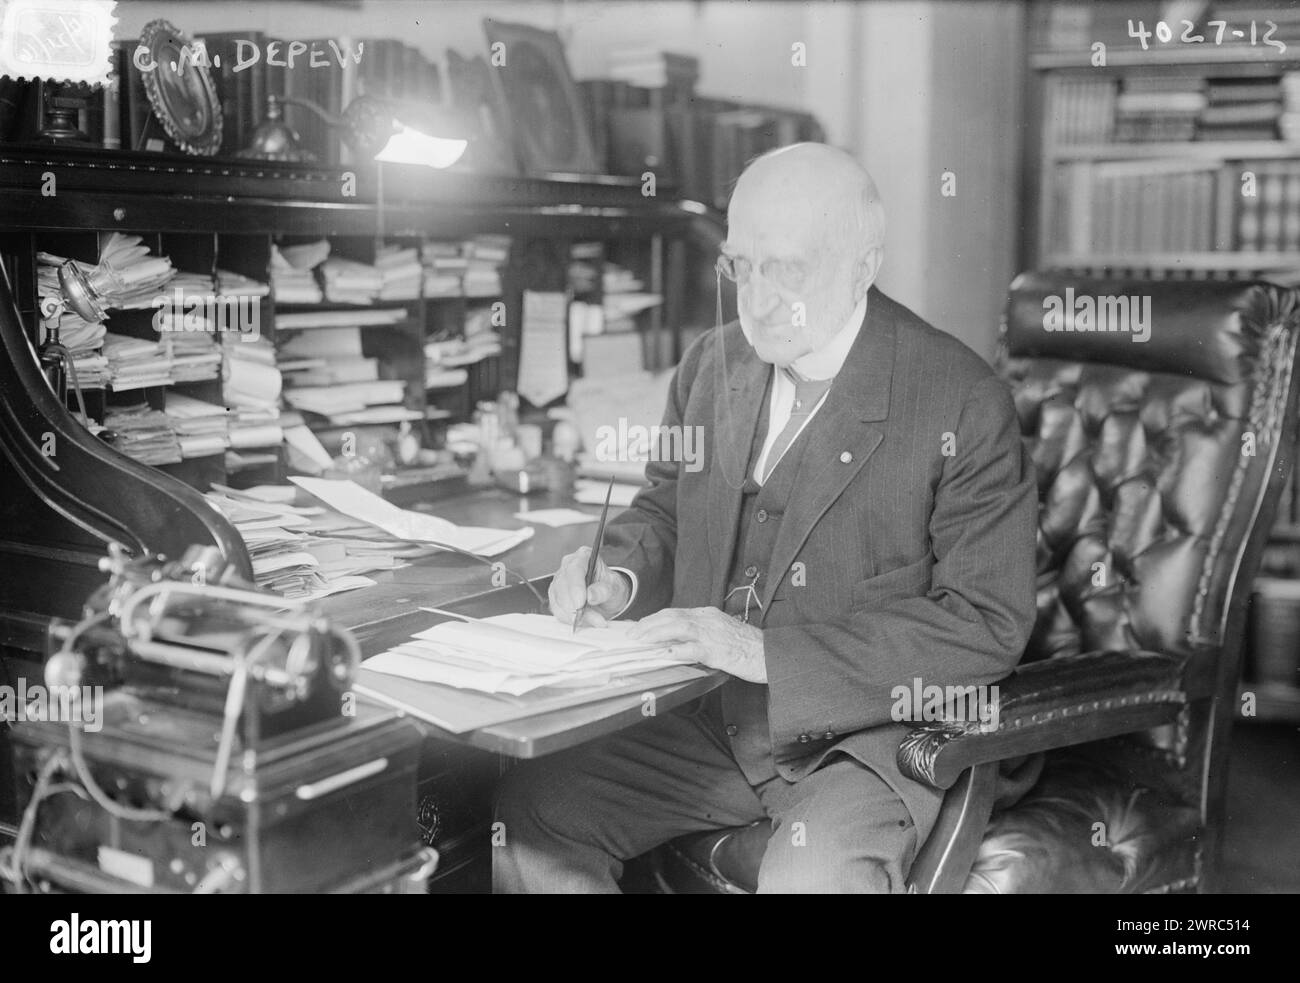 C.M. Depew, Photograph shows lawyer Chauncey Mitchell Depew (1834-1928) who served as U.S. Senator from New York., 1916 Oct. 21, Glass negatives, 1 negative: glass Stock Photo